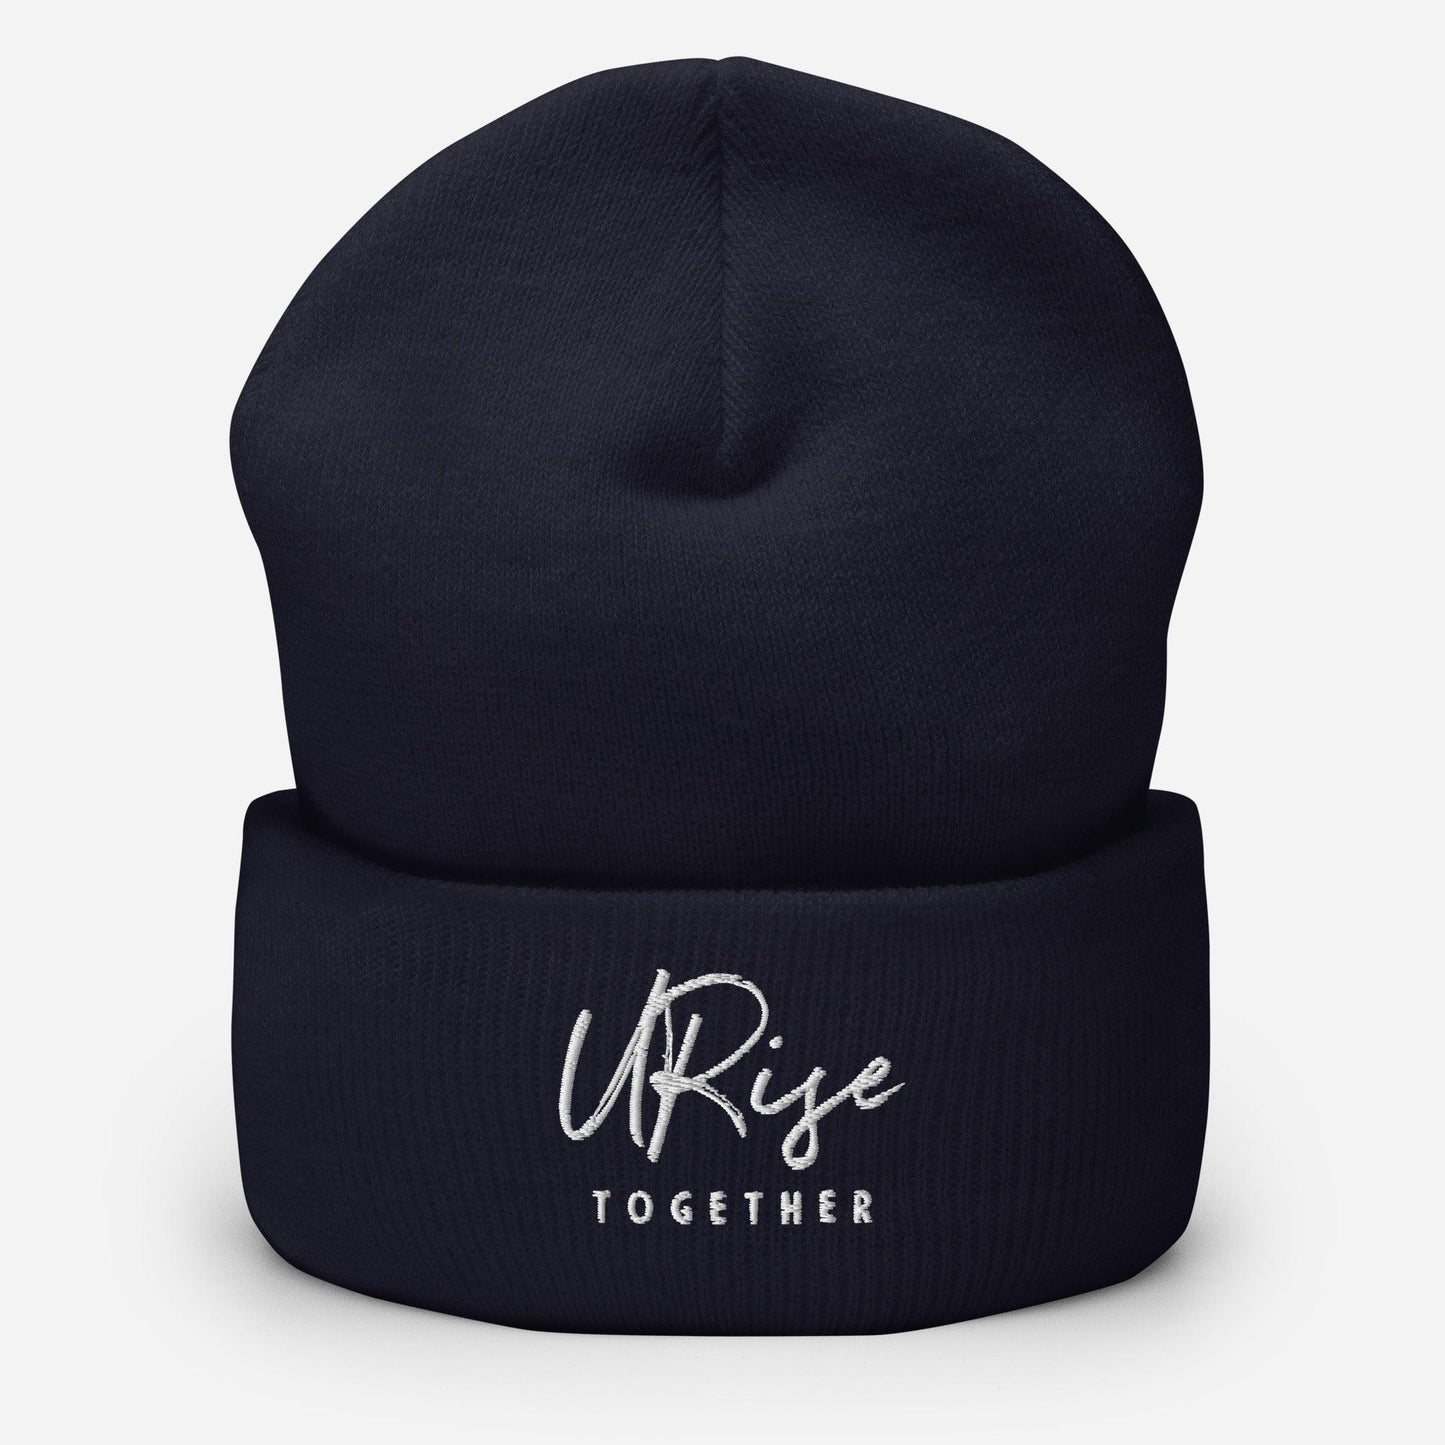 "URise Together" Embroidered Cuffed Beanie - Navy - URiseTogetherApparel